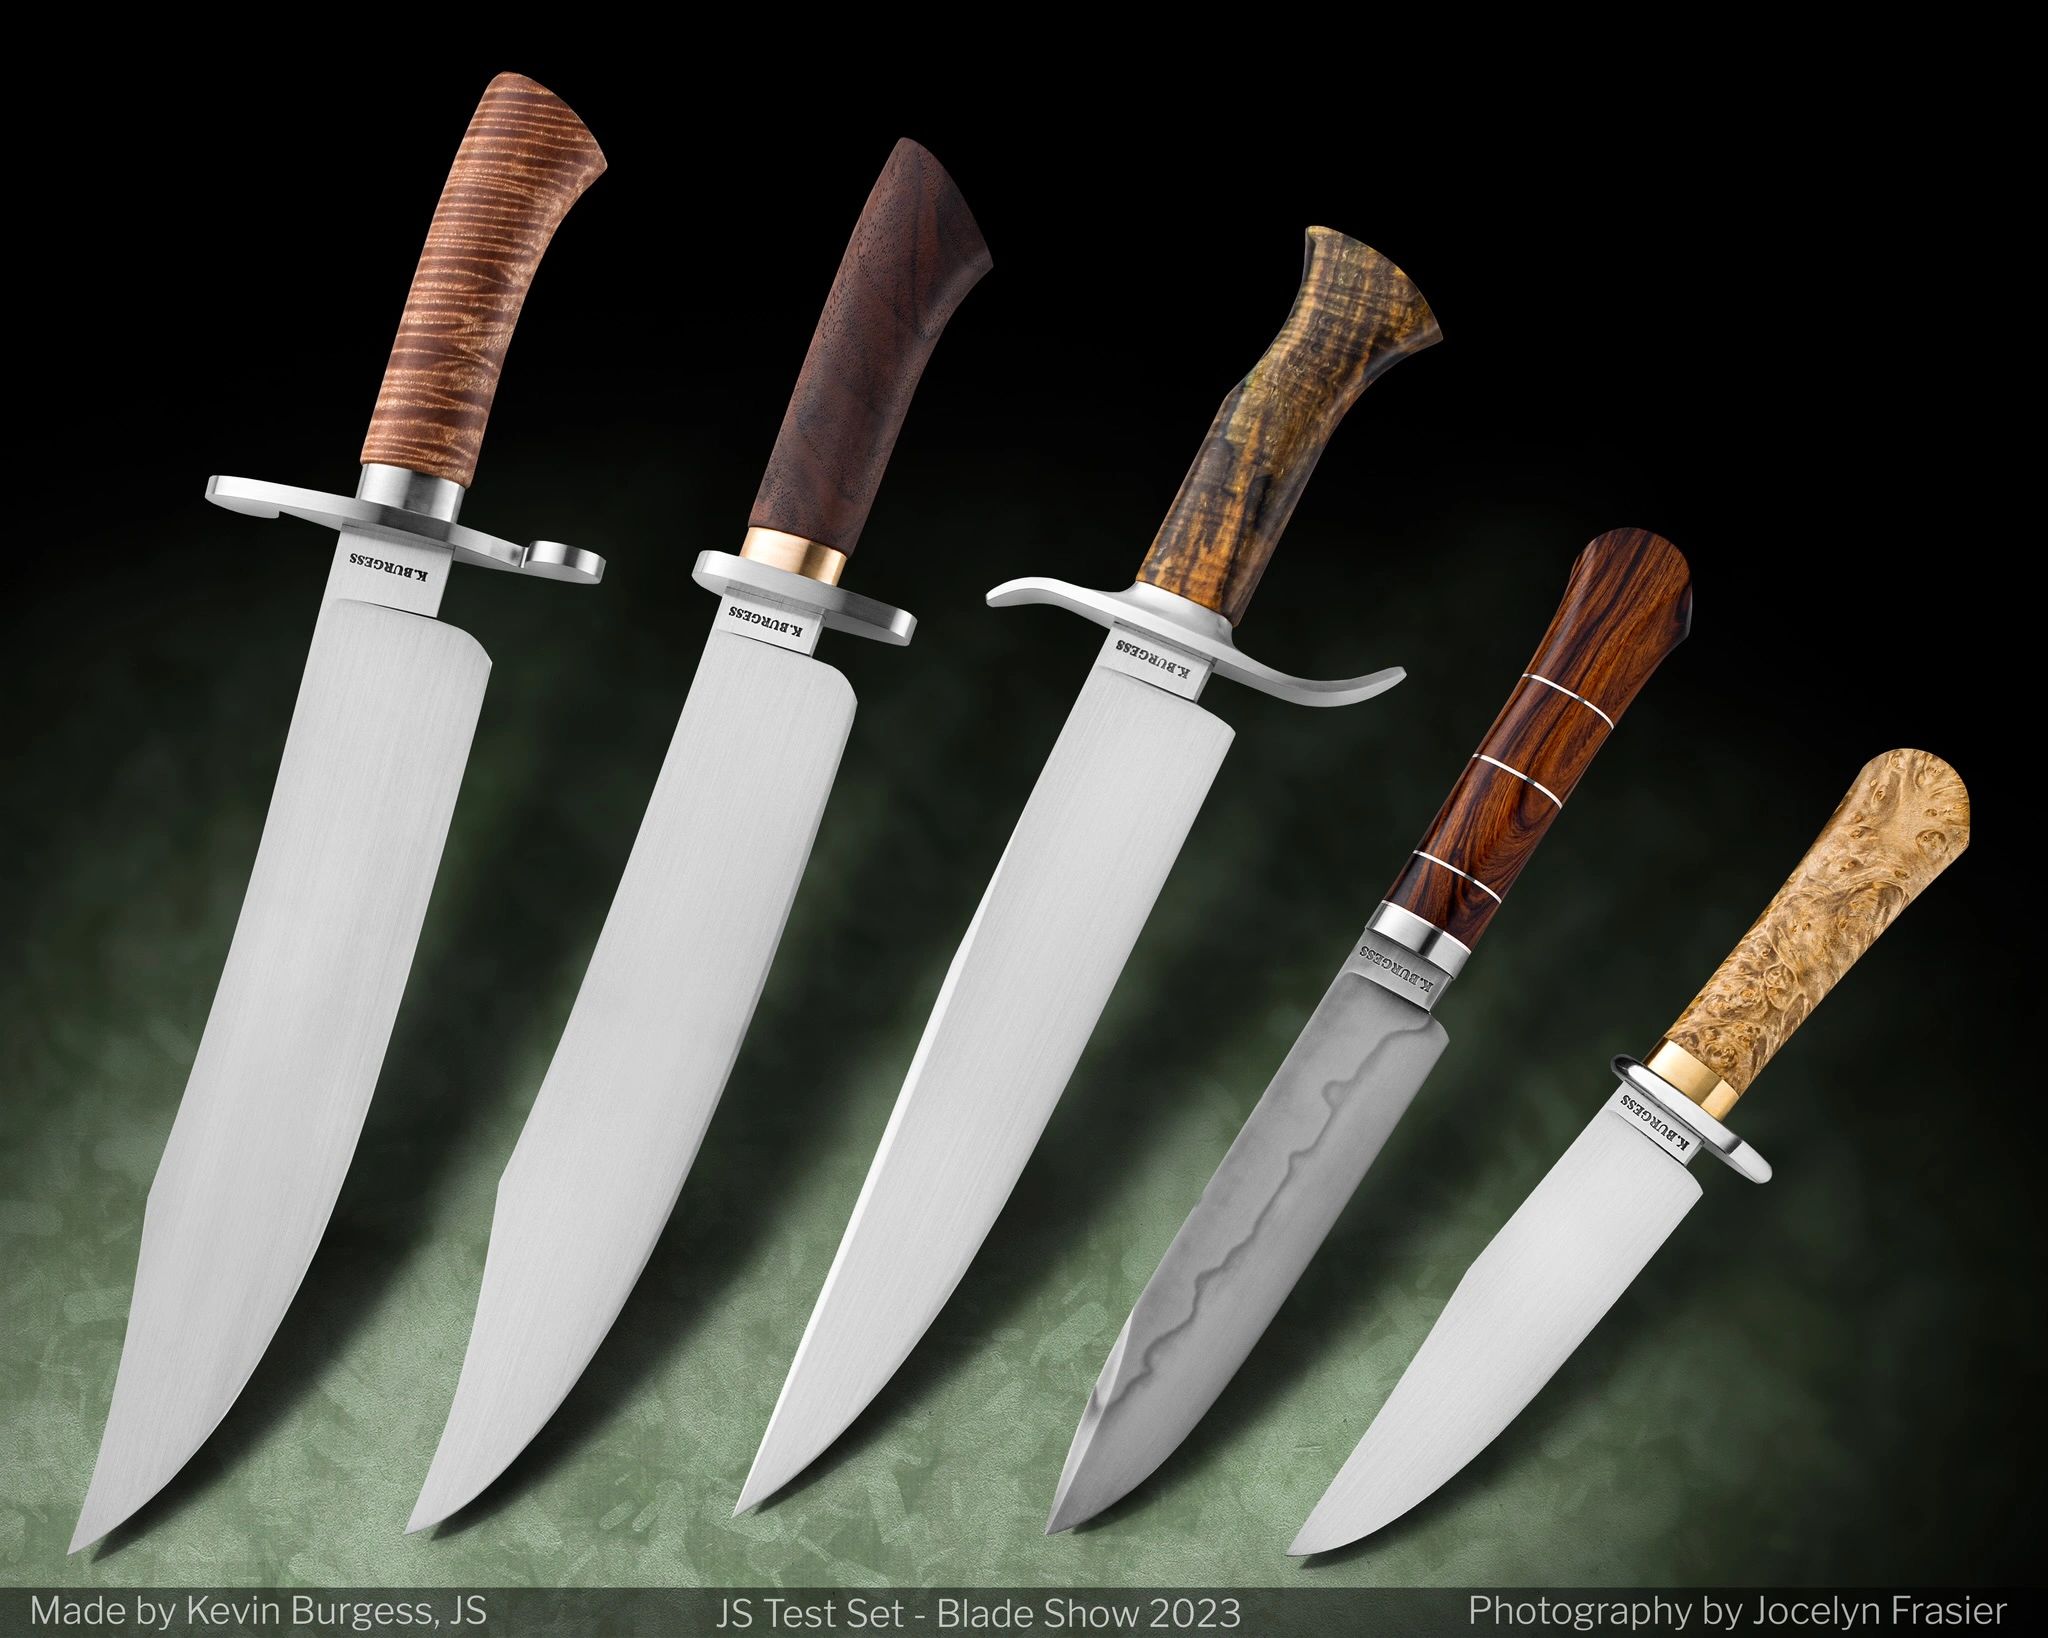 Forged in fire. Knives